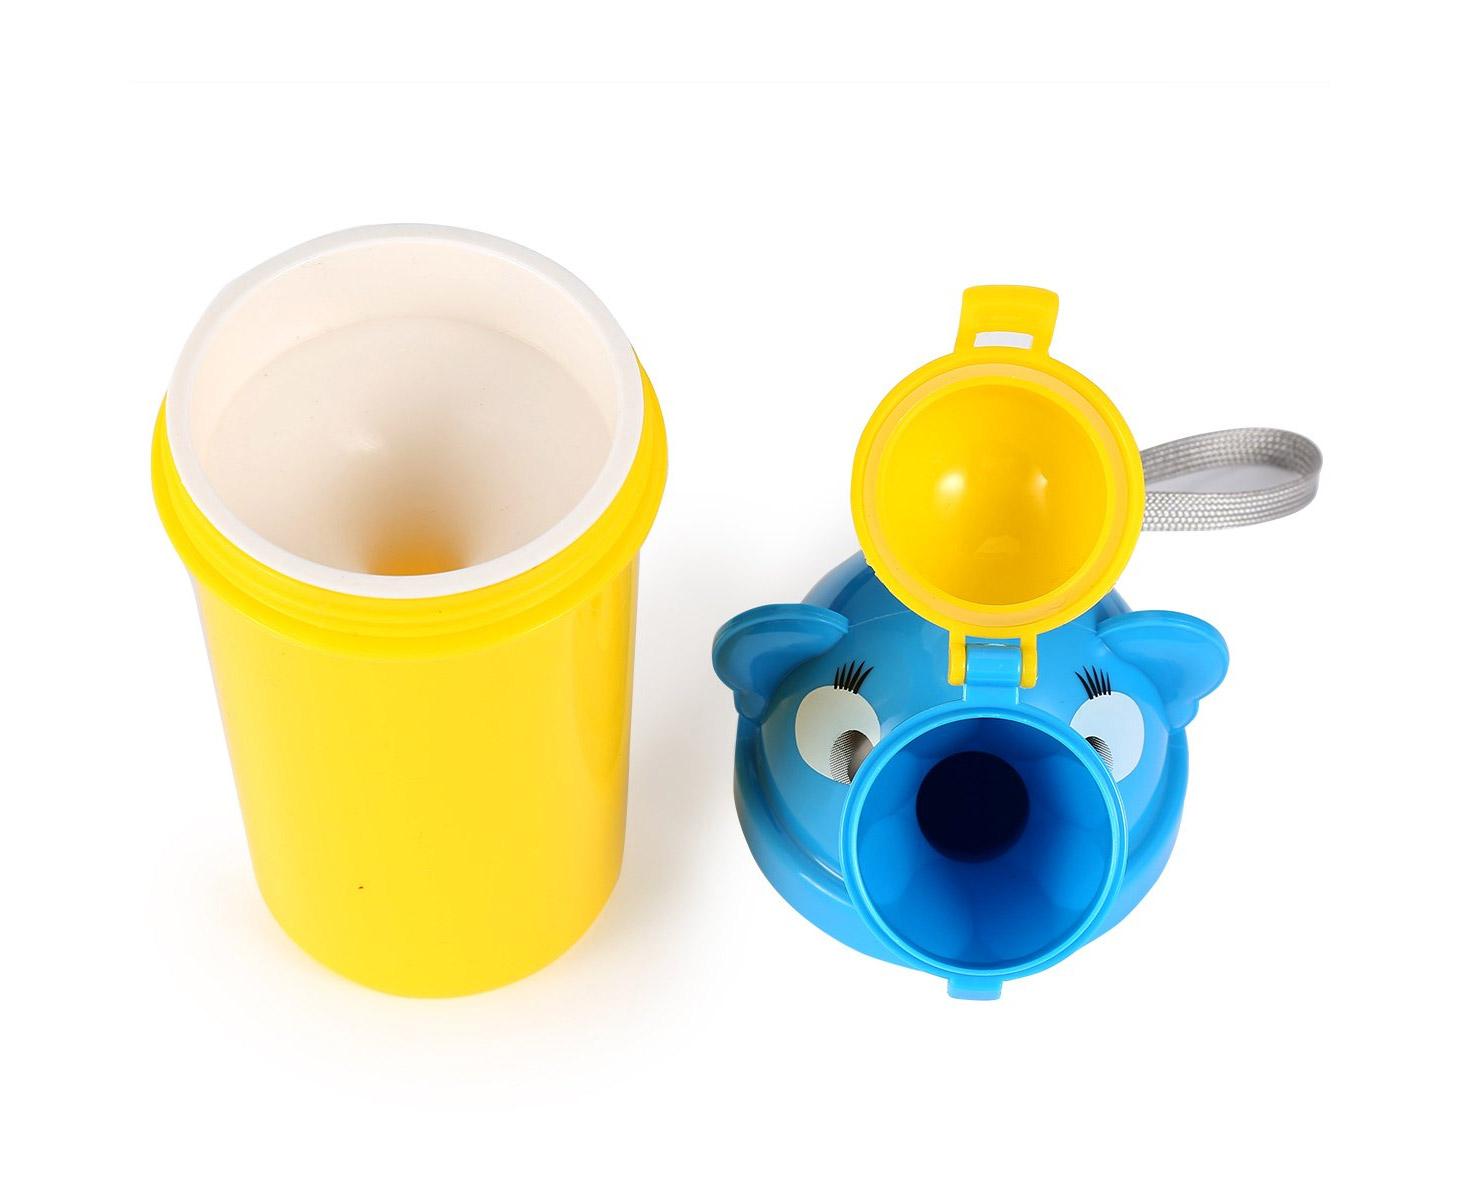 Emergency Travel Urinal For Kids